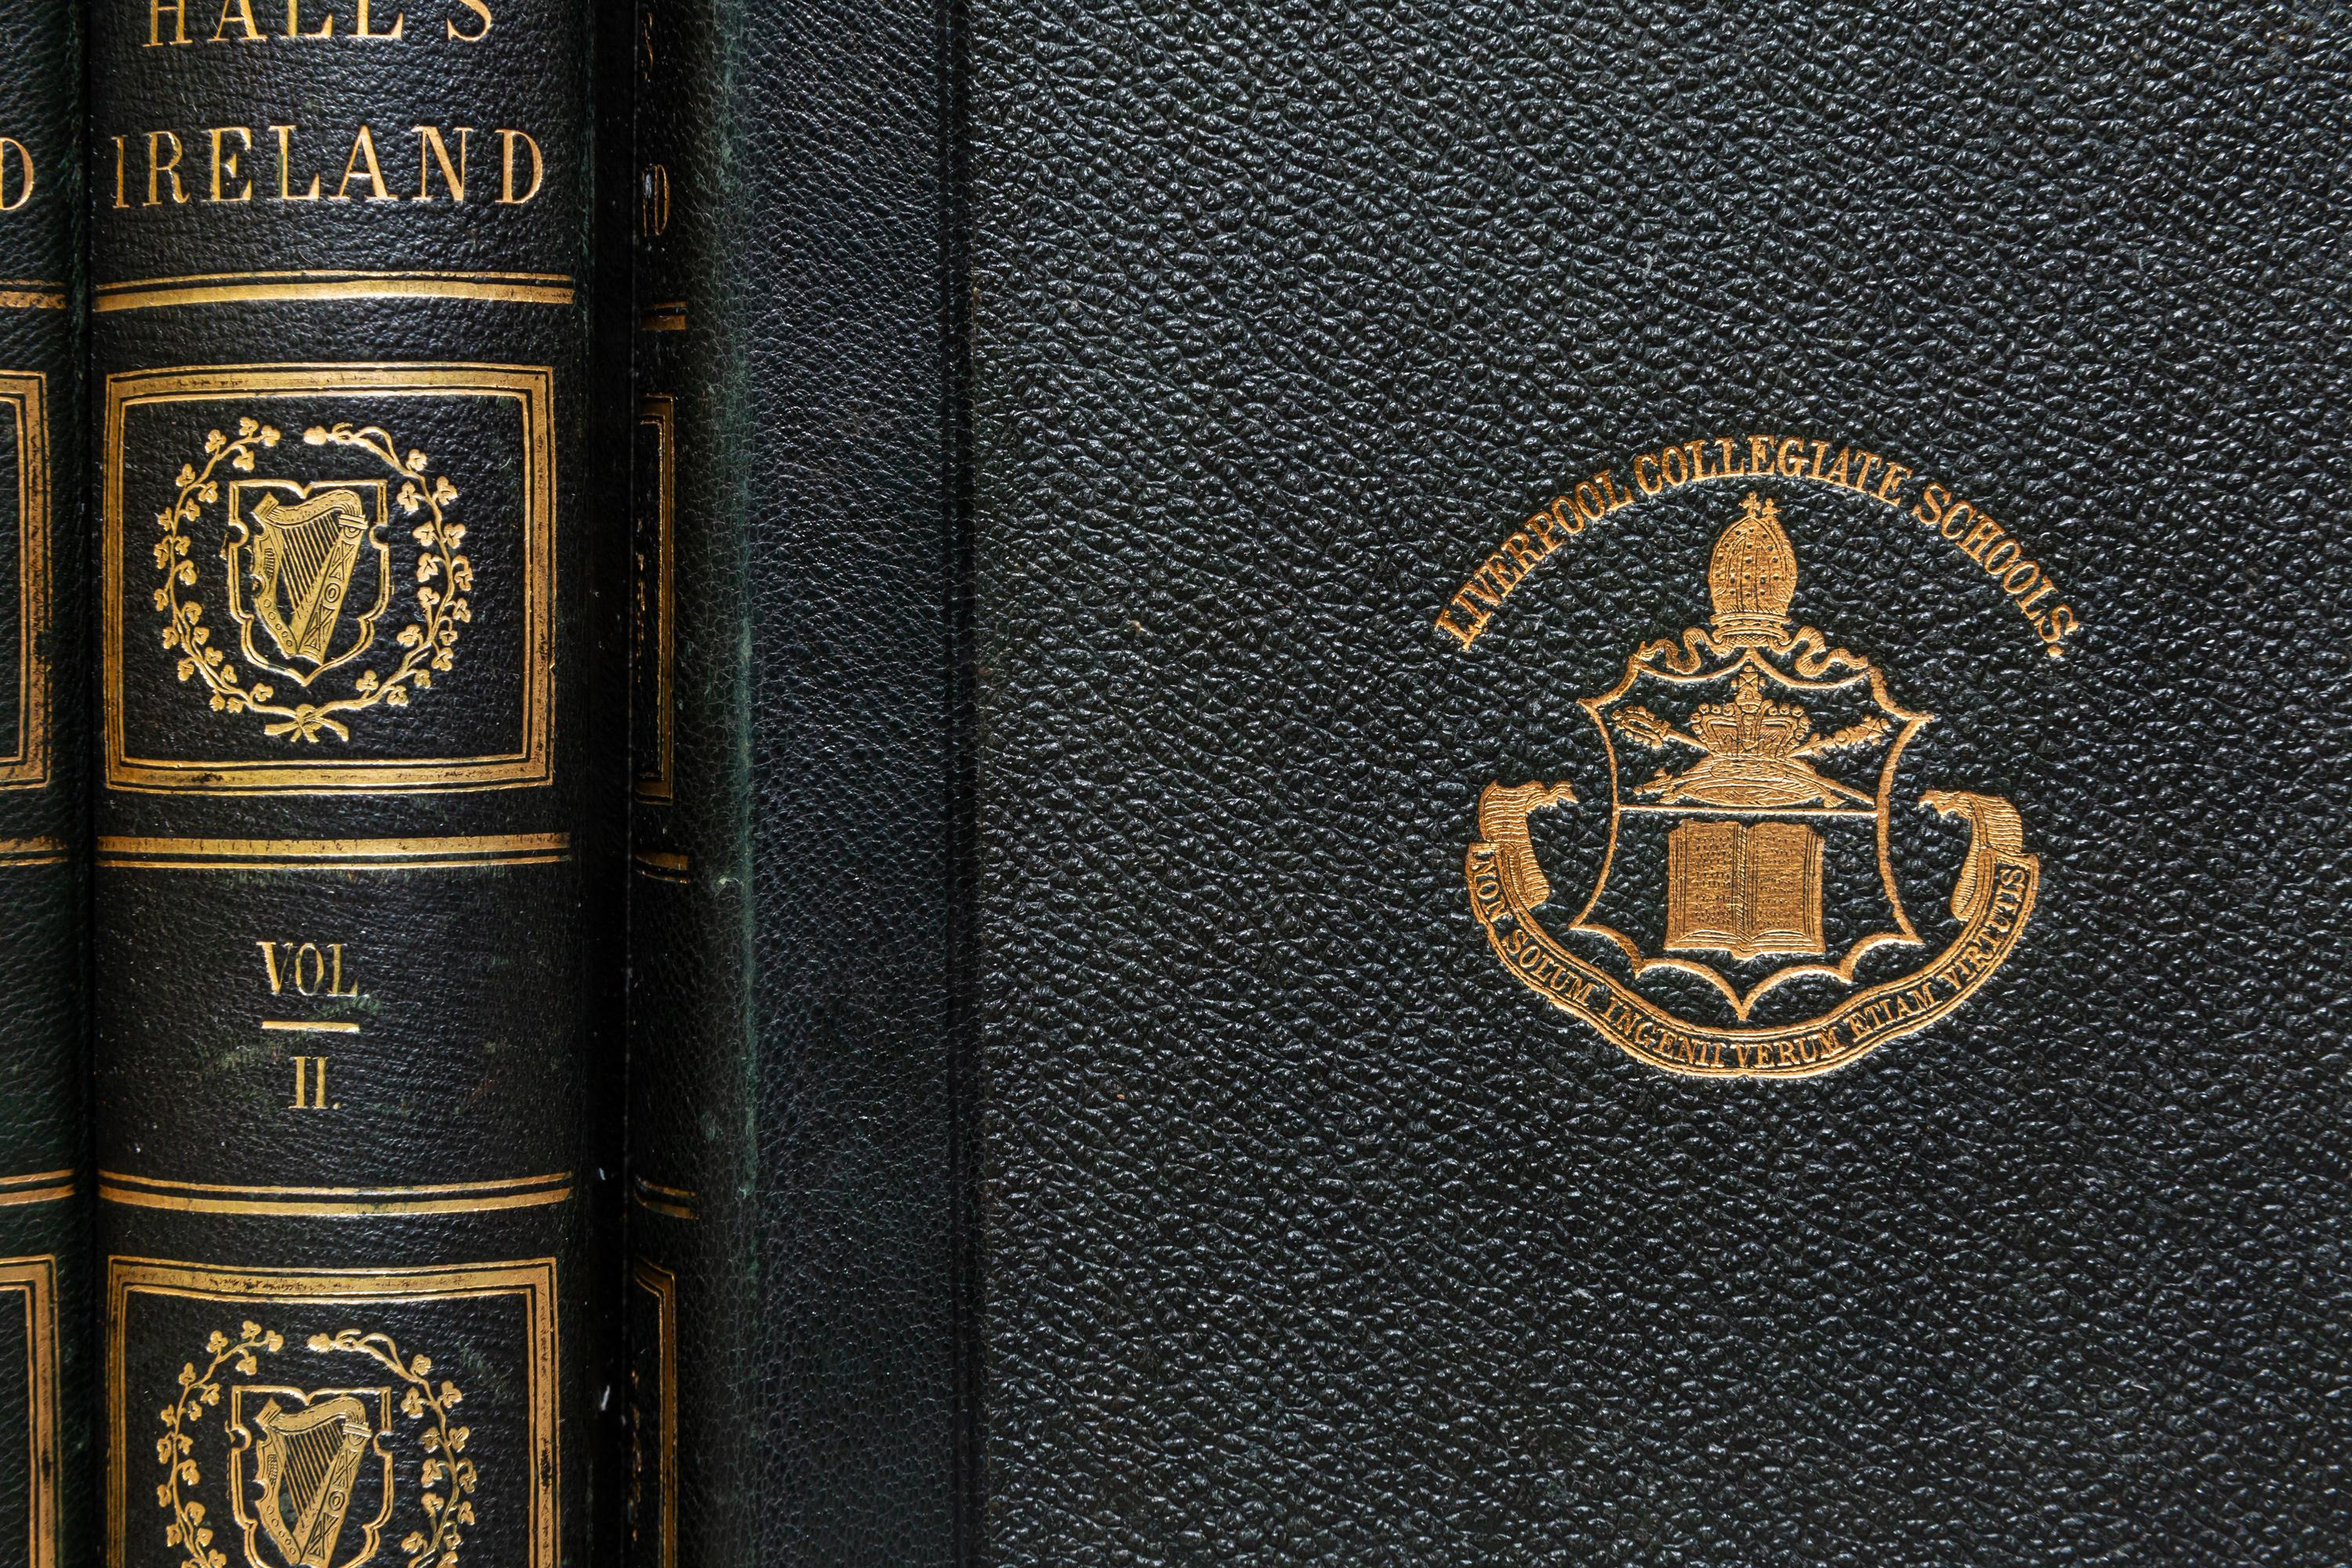 Leather 3 Volumes, Mr. and Mrs. S. C. Hall, Ireland For Sale